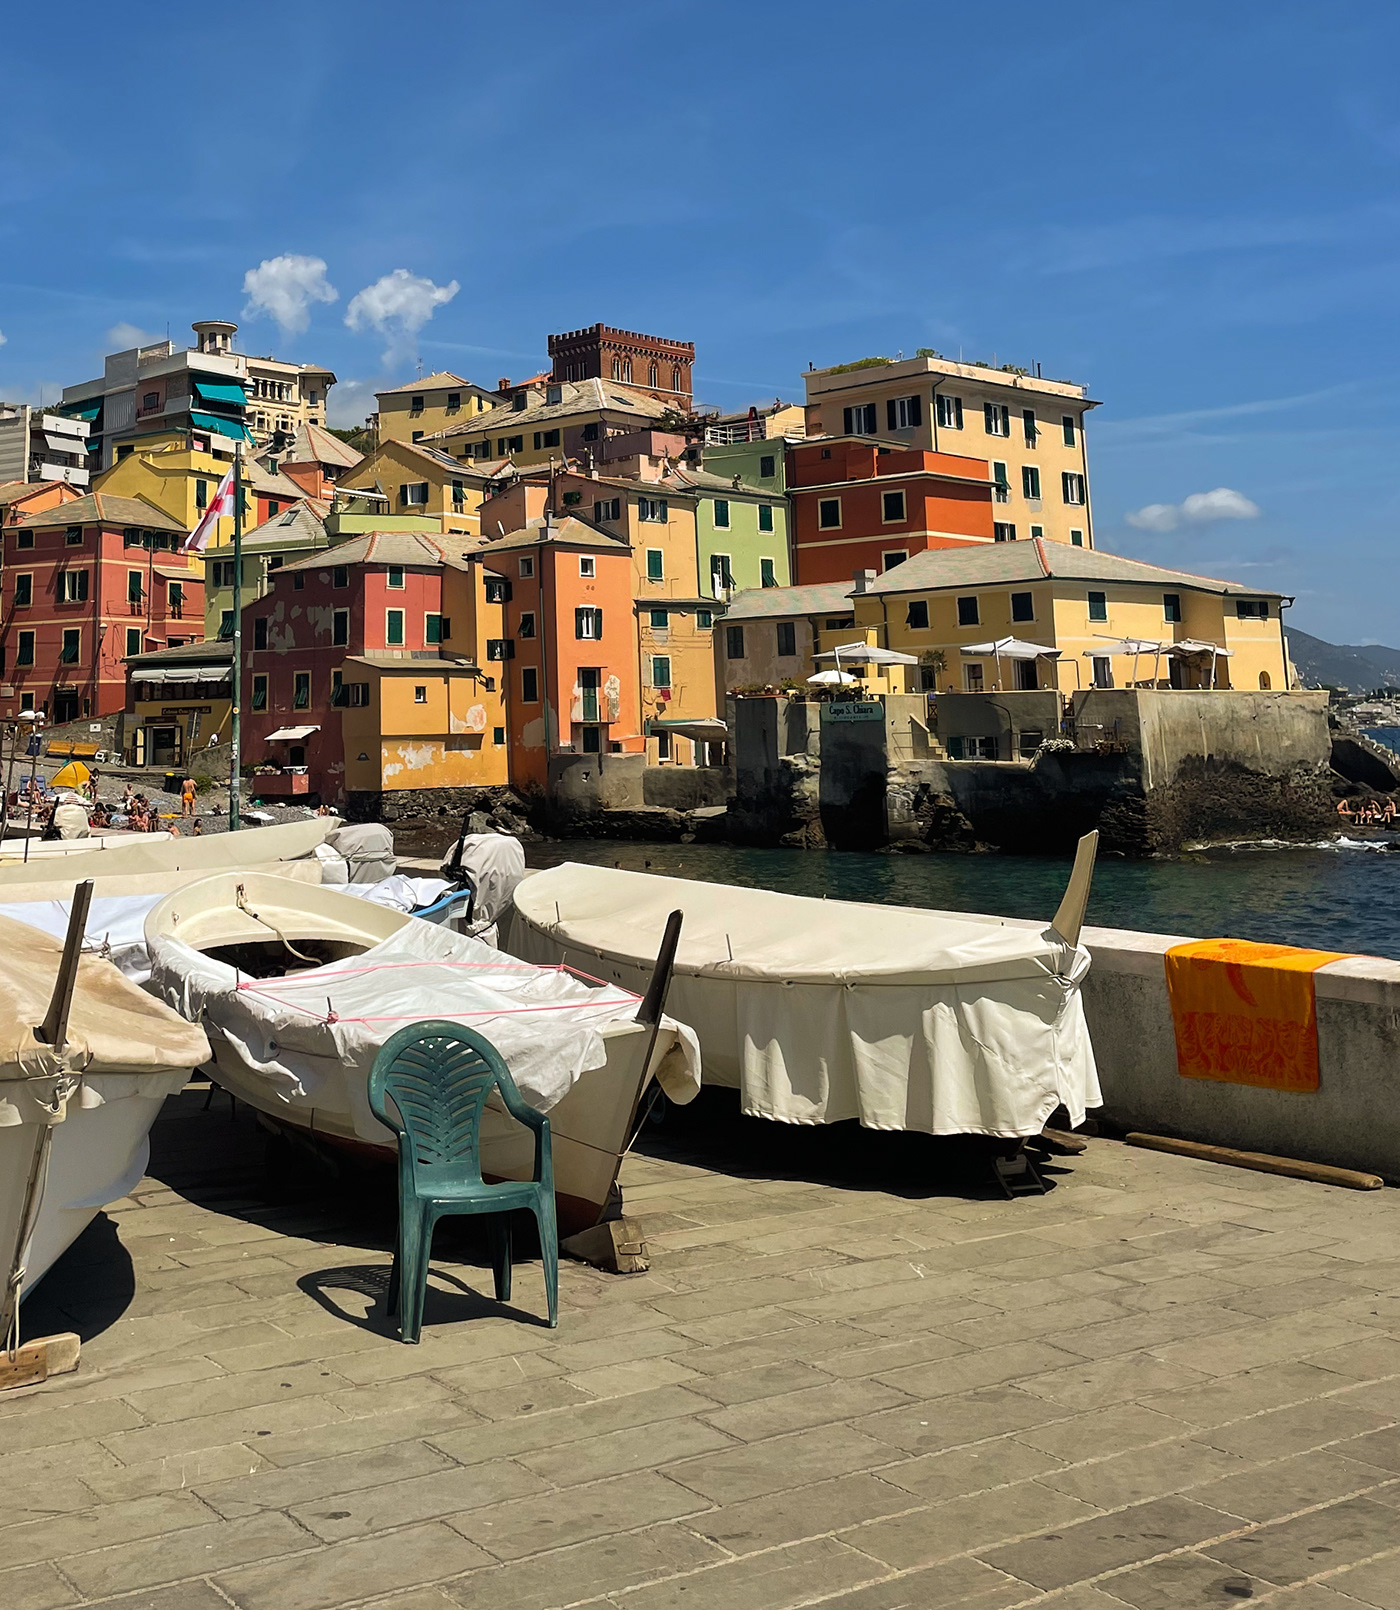 buildings infrastructure architecture golden flag Italy windows blue White Boats sea Yachts Coast chair people group swimming fruits market lights vegetables colors color flags woman concern Doors fountain family kids children boys portrait fleamarket fruitmarket genoa